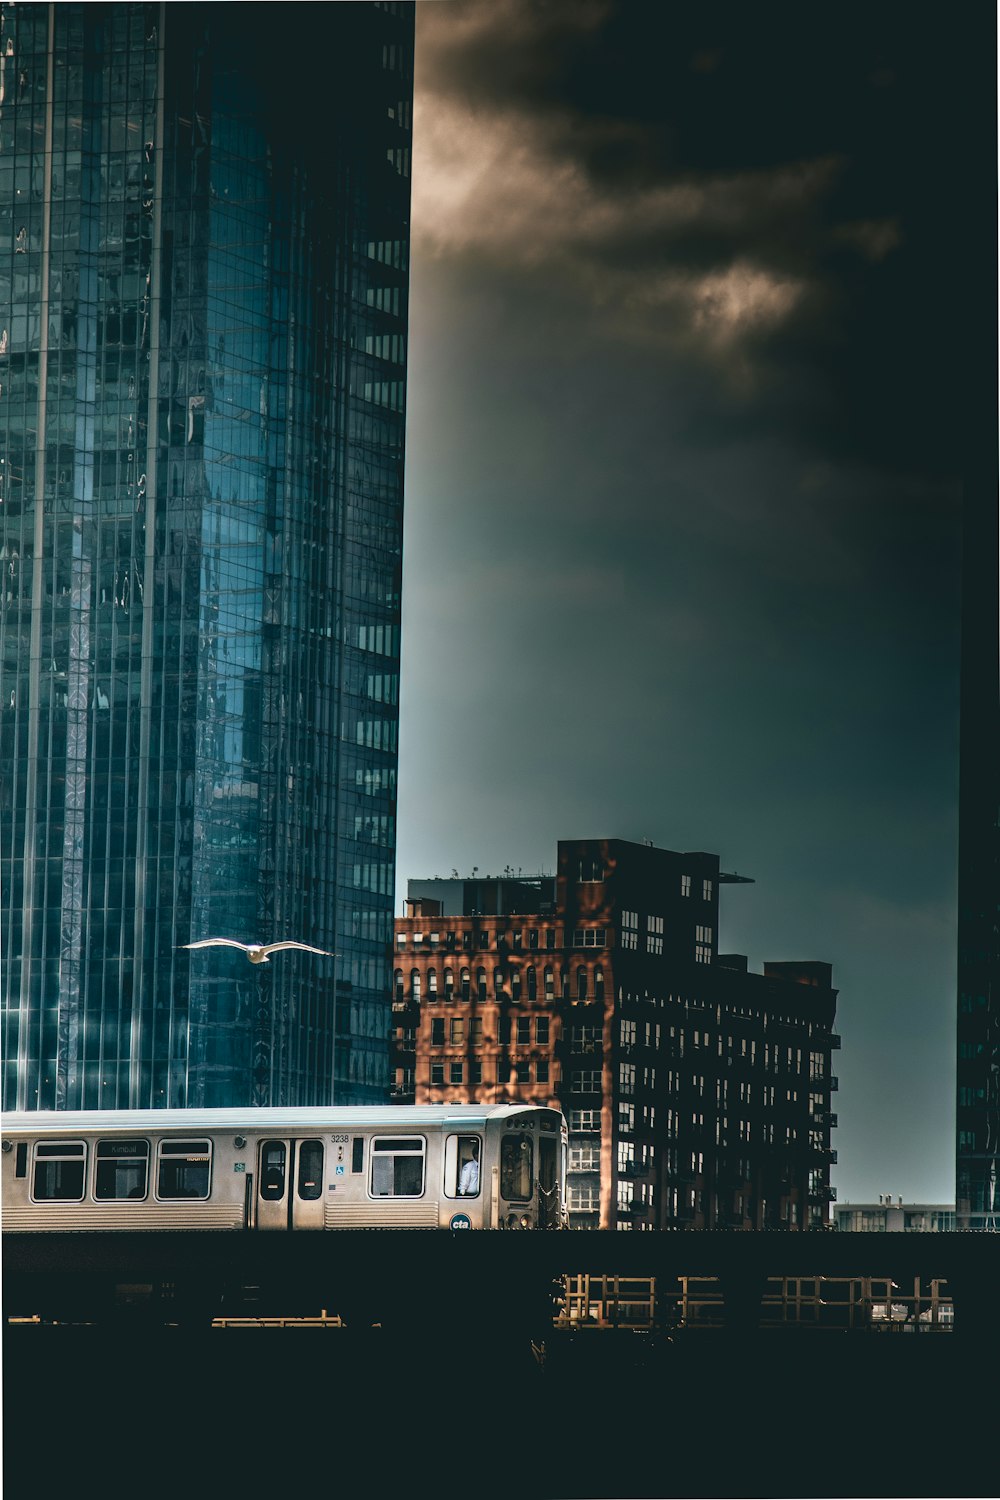 gray train passing by high-rise building